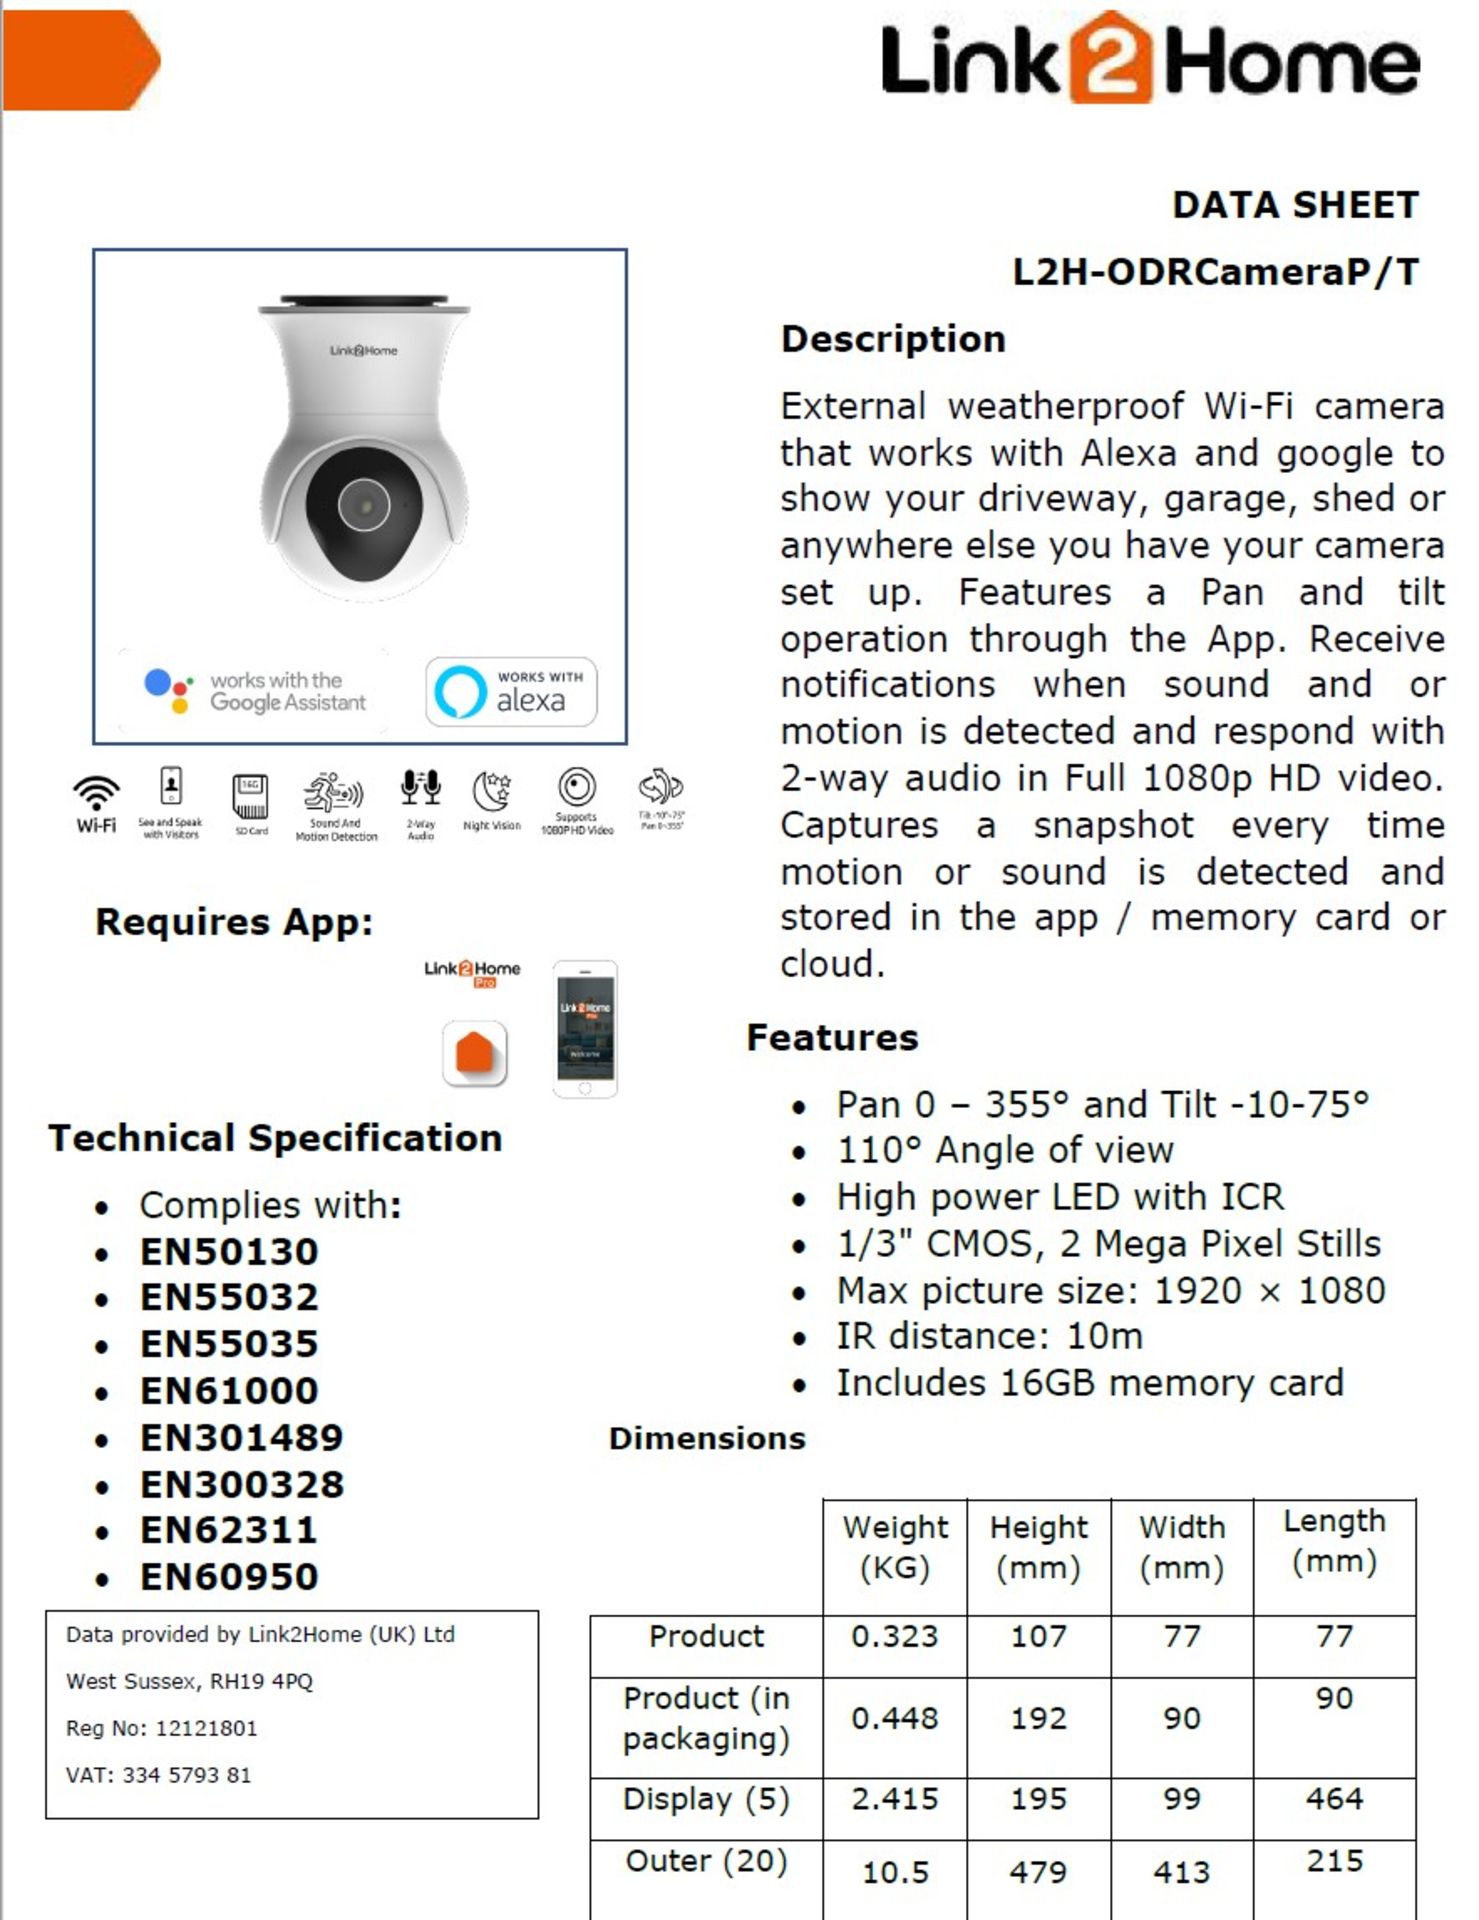 5 x Link2Home 'L2H-ODRCameraP/T' External Weatherproof Wi-Fi Cameras with Pan and Tilt Operation - - Image 10 of 14